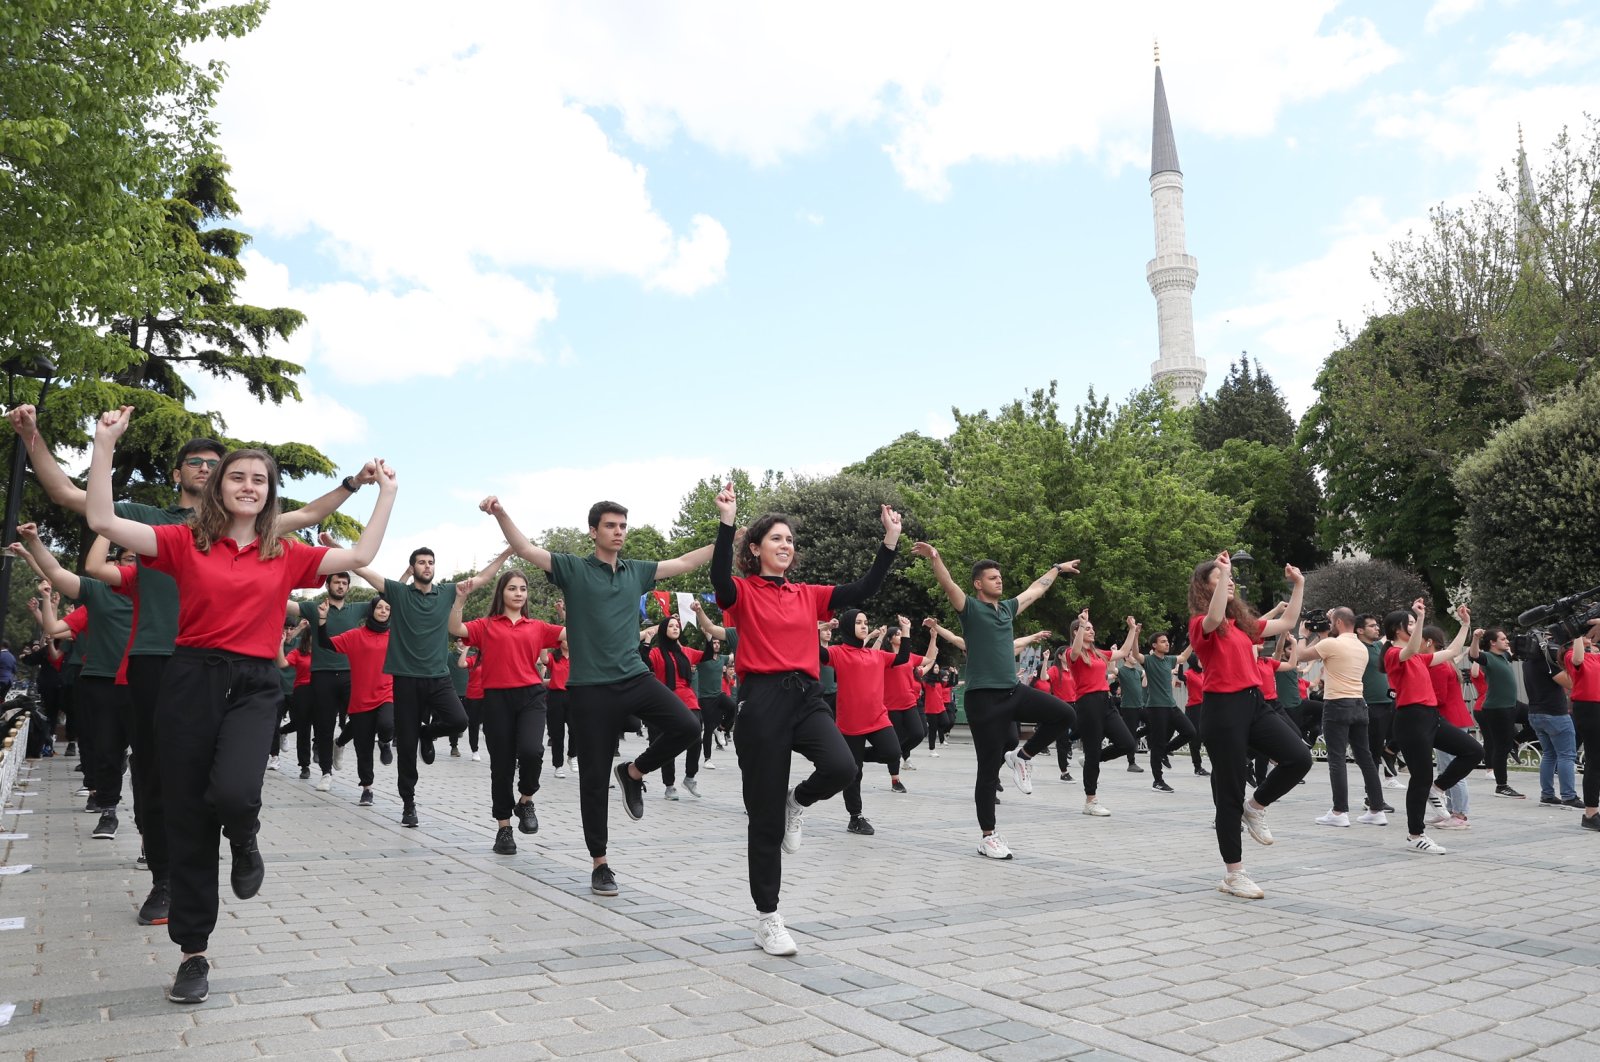 Nearly 2,000 young people perform the traditional harmandalı folk dance at Sultanahmet Square, in Istanbul, Turkey, May 19, 2022. (DHA PHOTO)